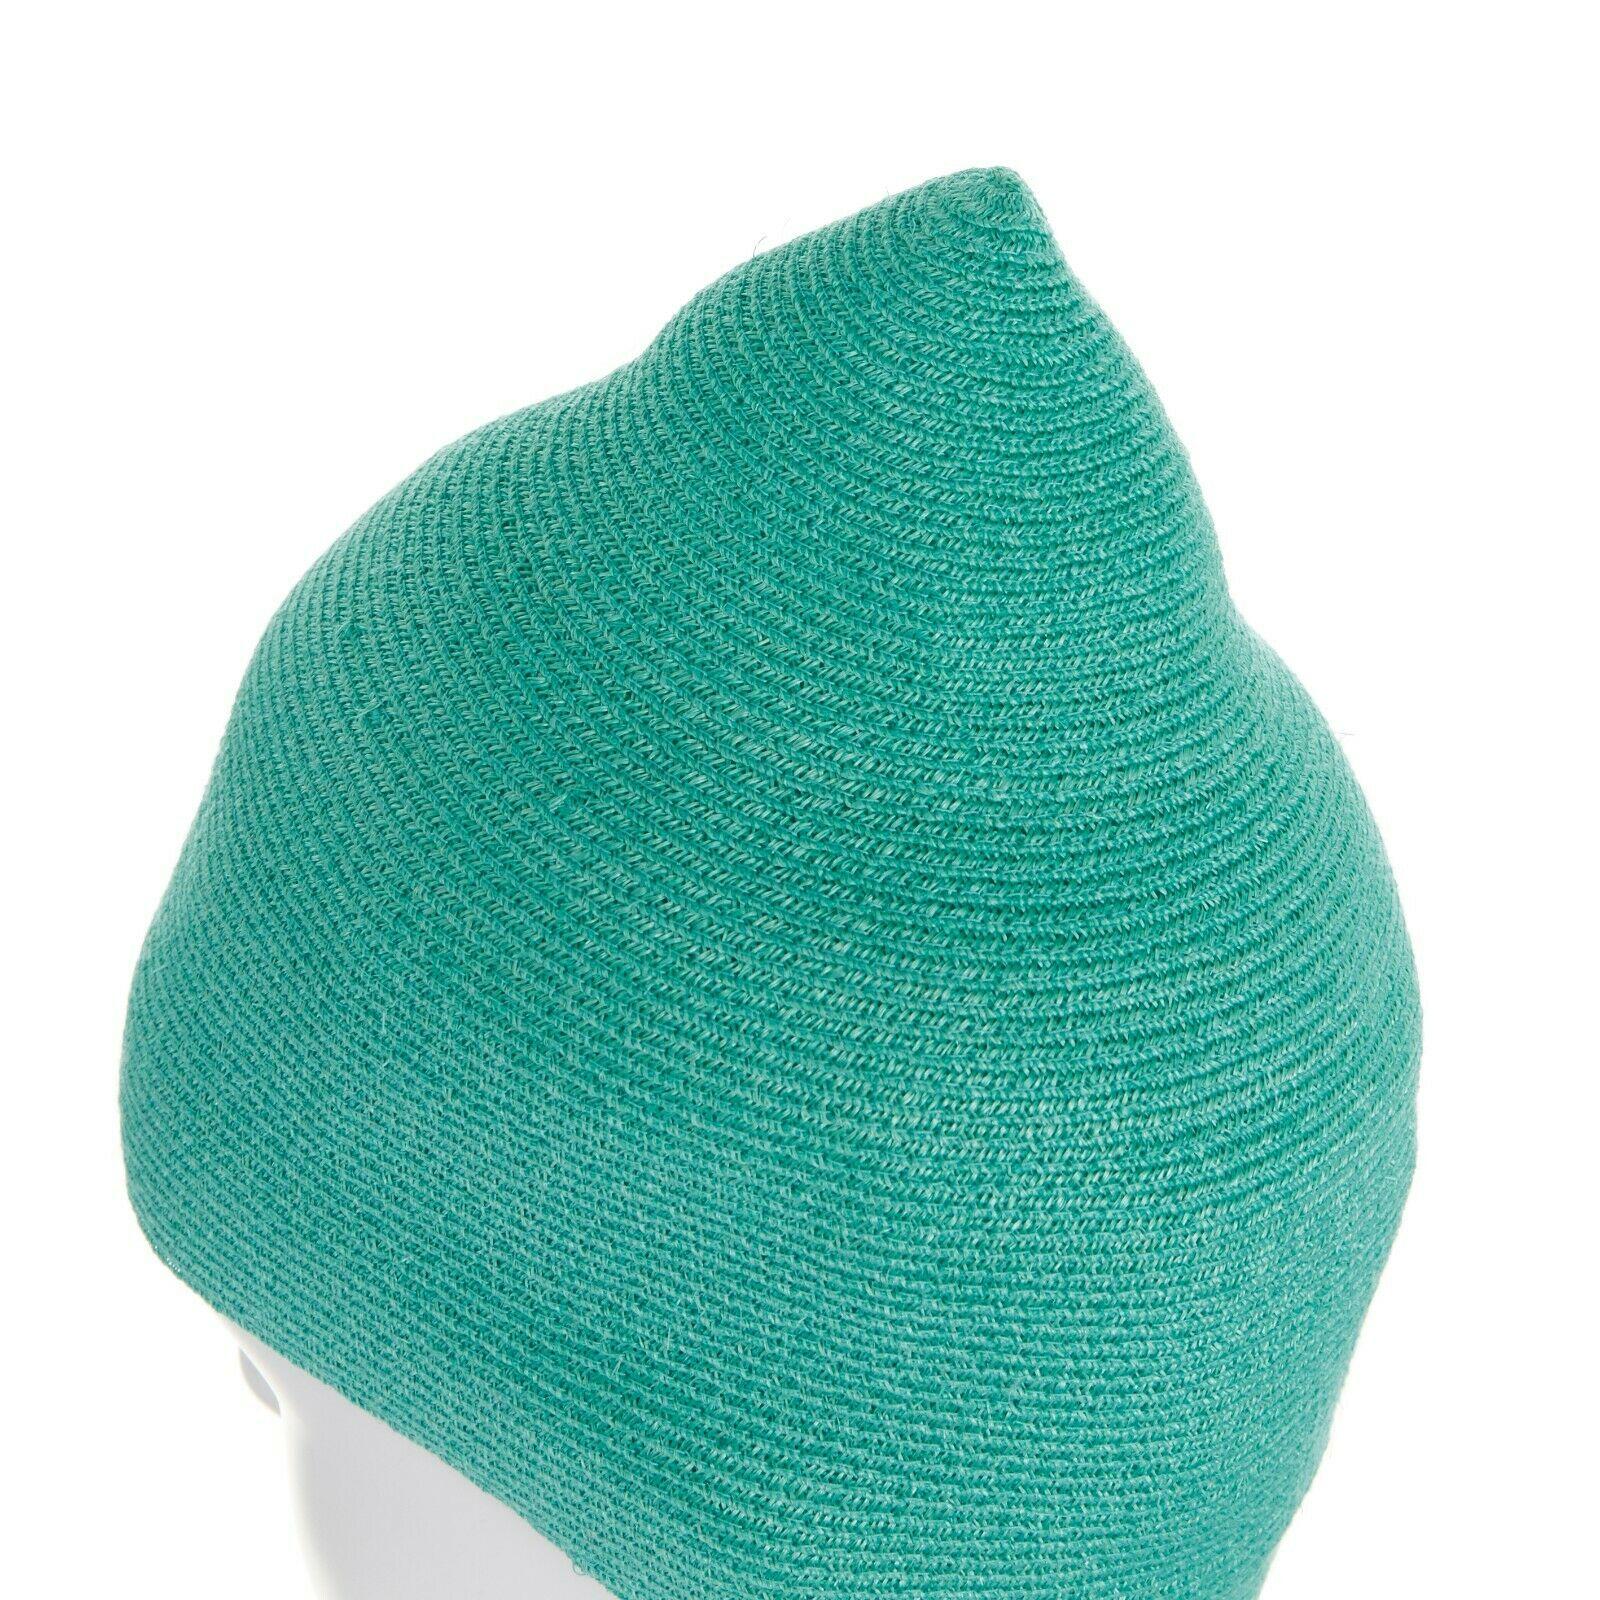 Women's ISSEY MIYAKE PLEATS PLEASE teal green raffia straw woven pointed moroccan hat